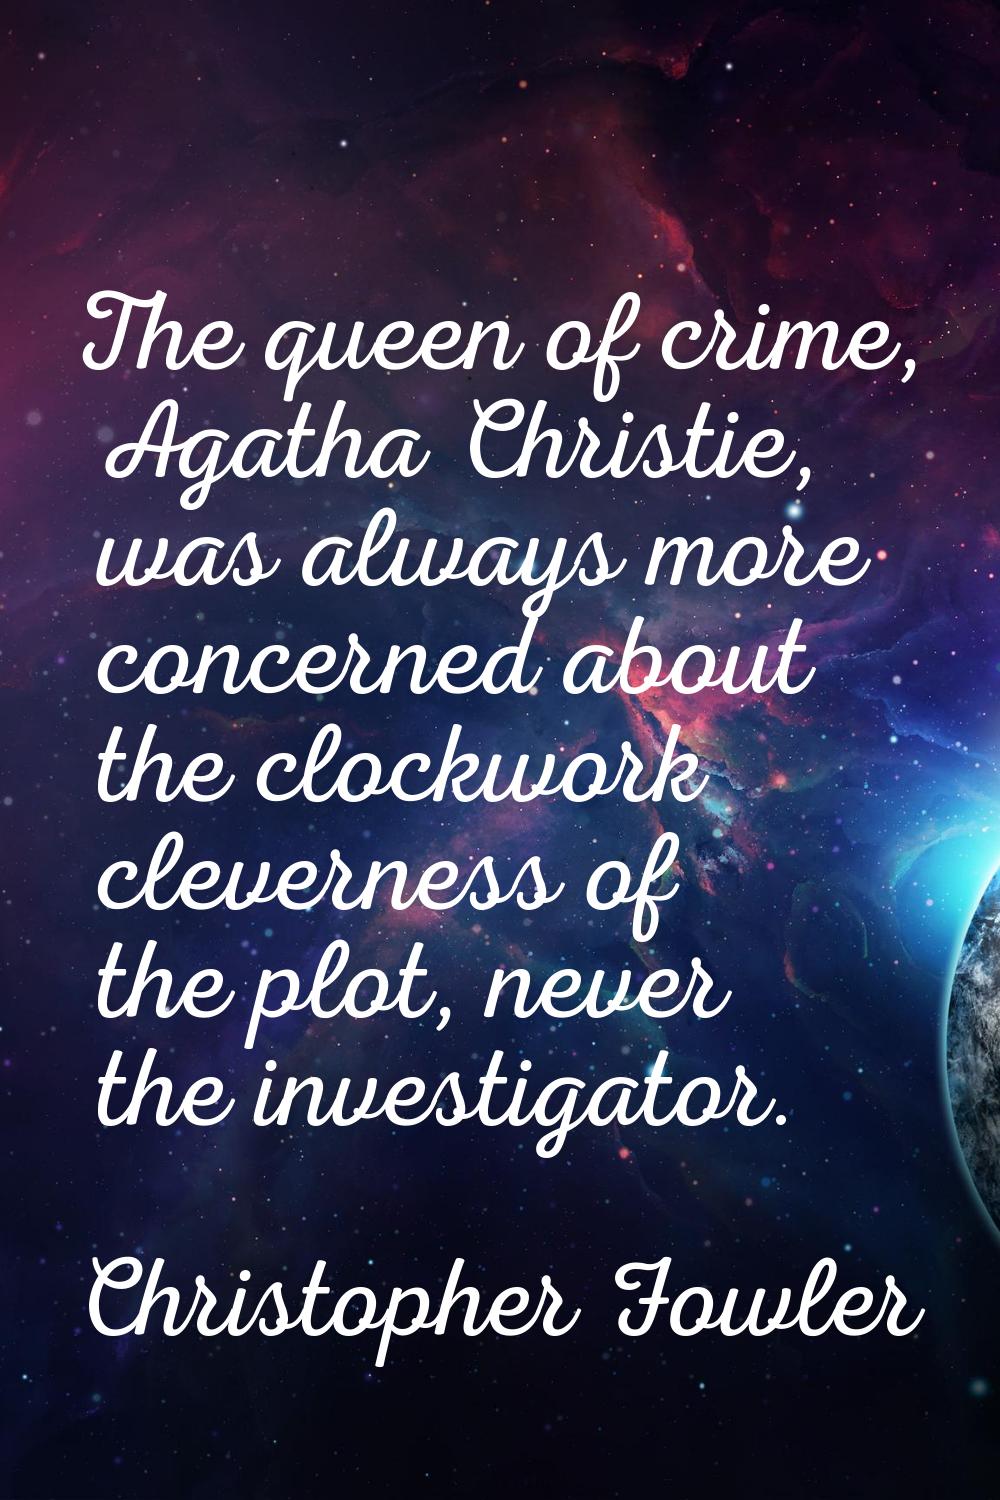 The queen of crime, Agatha Christie, was always more concerned about the clockwork cleverness of th